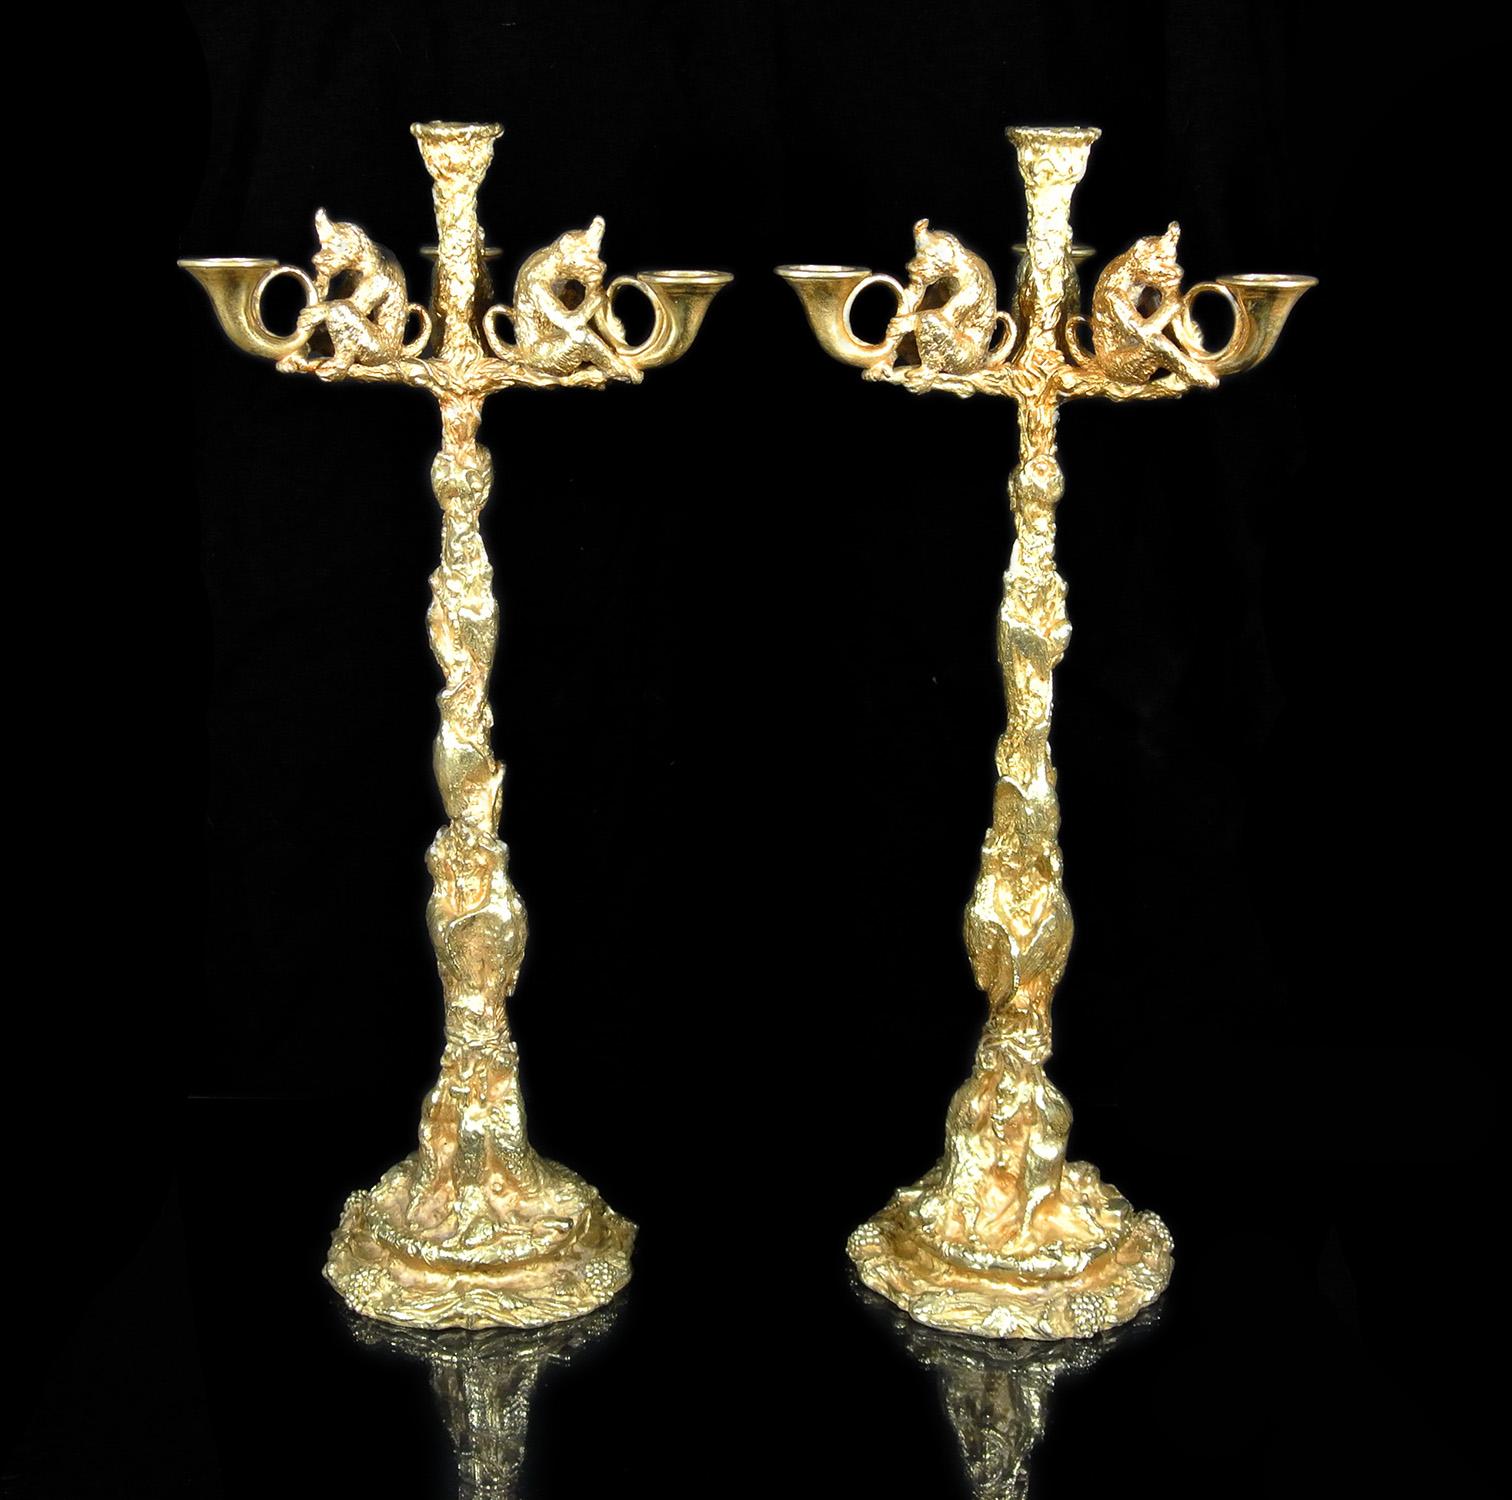 An exceptionally rare pair of large gilt bronze candelabra by Christophé Fratin and dating from c. 1850. In excellent original condition and with the wonderful detailing for which this sculptor is World renowned. The sconces formed from French horns